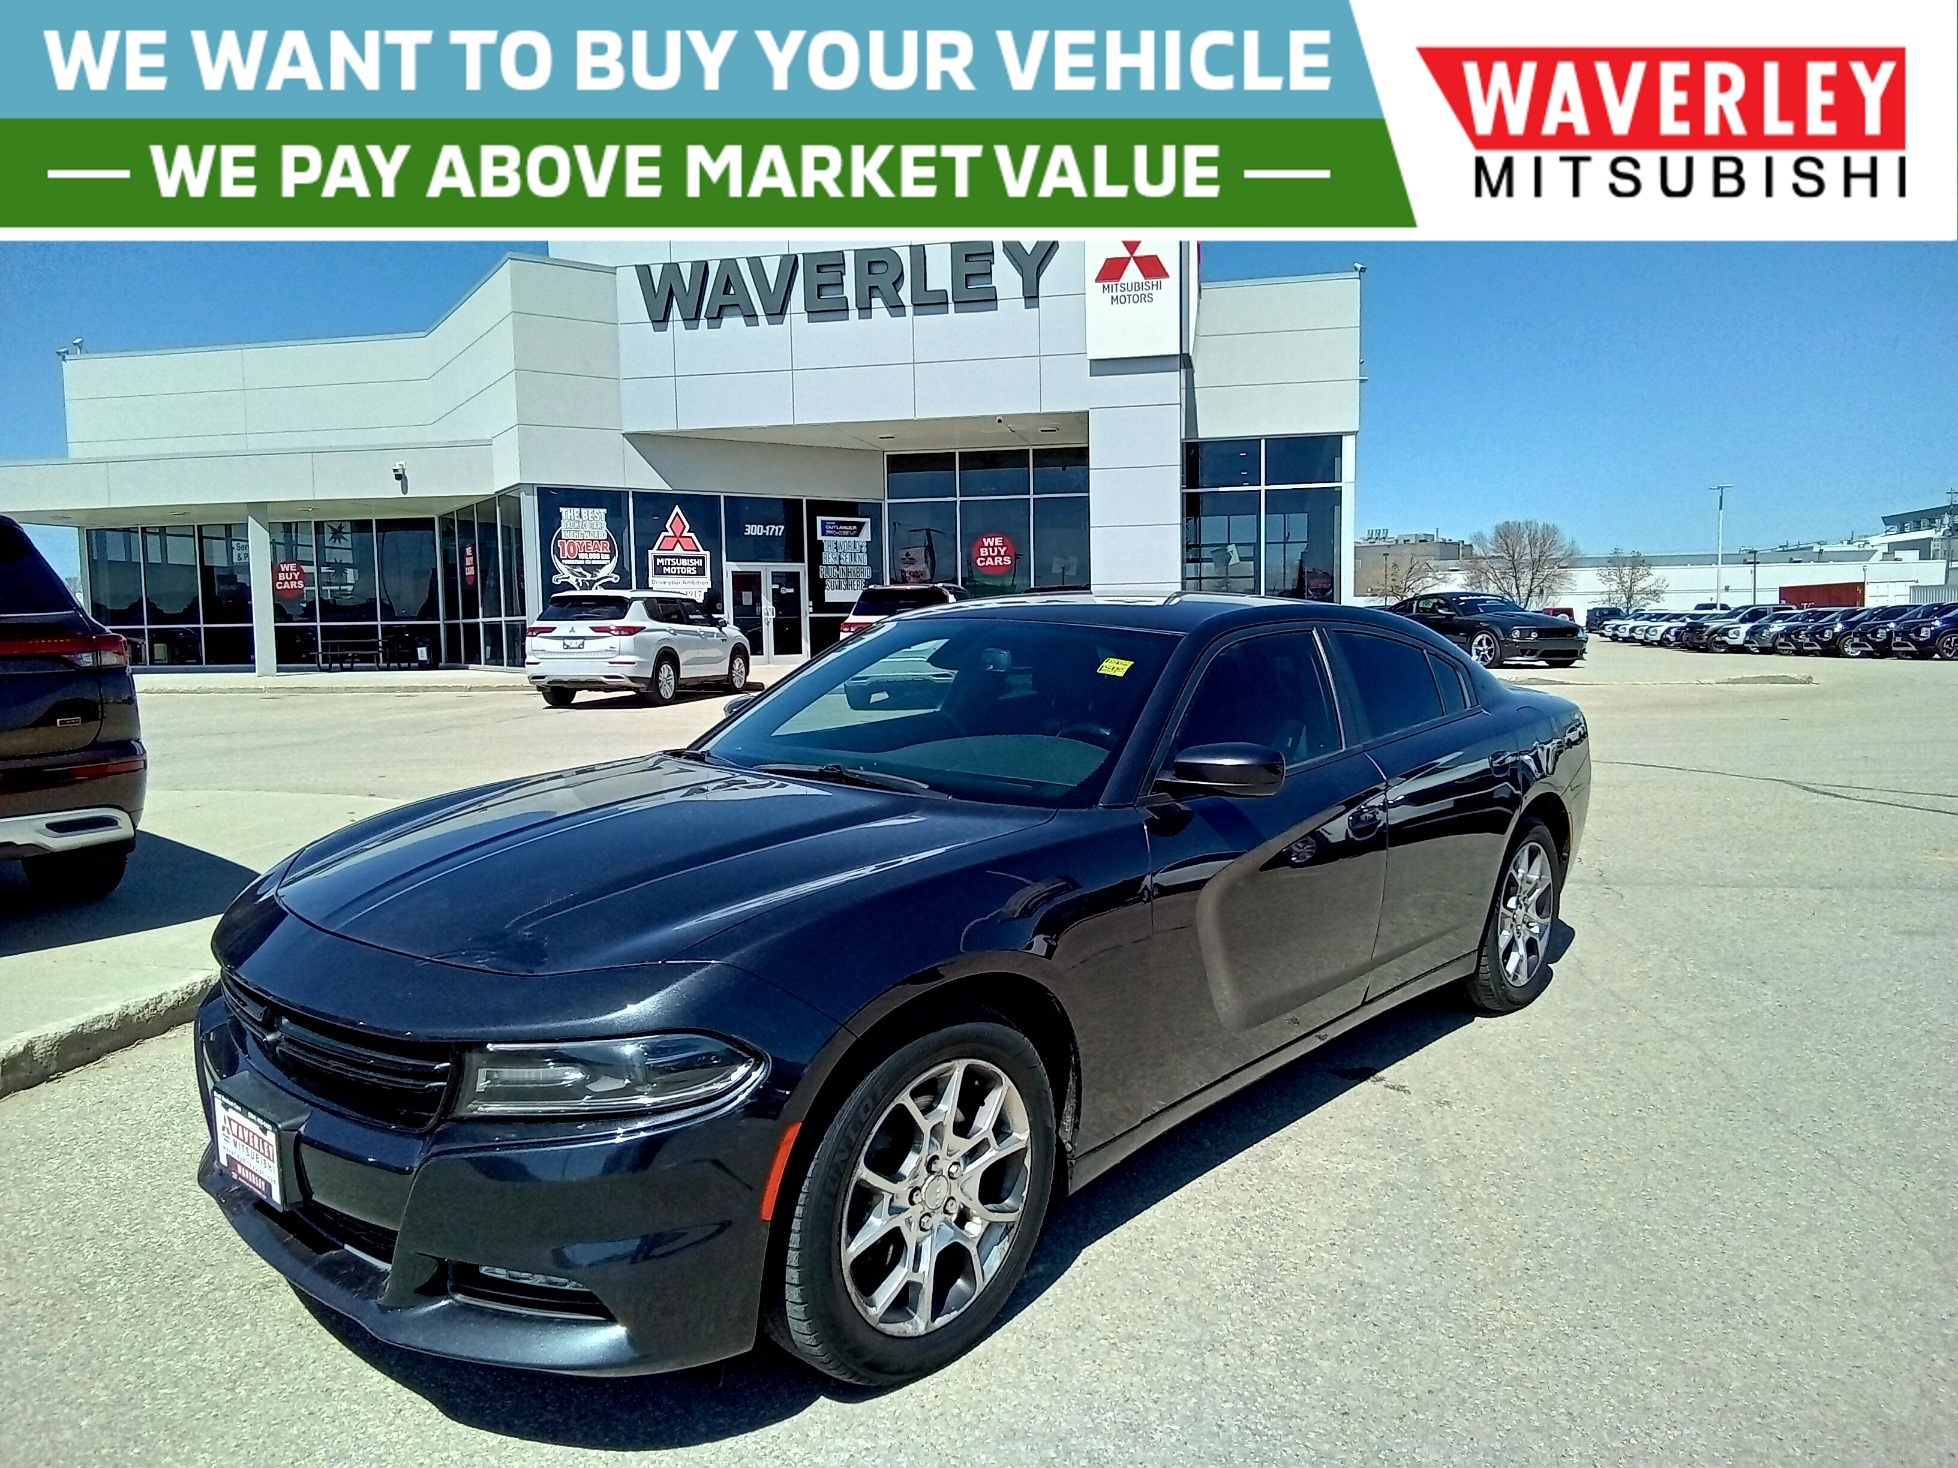 2017 Dodge Charger | 3.6L V6 | 8-Speed Automatic | AWD | Sedan